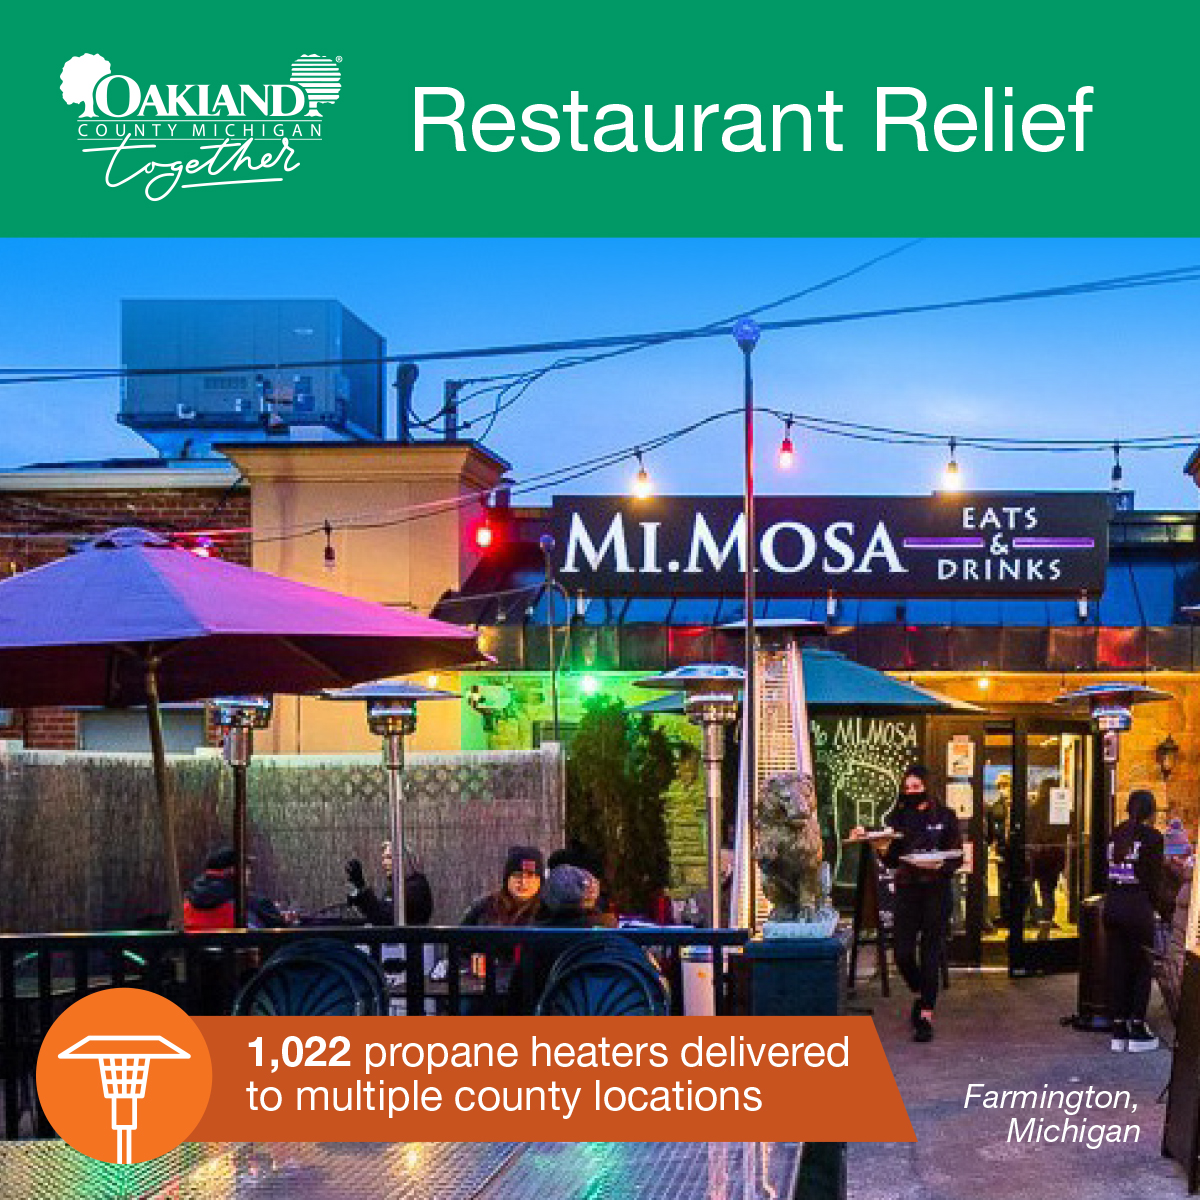 #OaklandCounty gave local bars and #restaurants stabilization grants in effort to support area businesses impacted by #COVID19. The funds were part of the new #OaklandTogether Restaurant Relief Program, learn more: bit.ly/3oq8fF1
#OaklandTogether #OCSOTC21